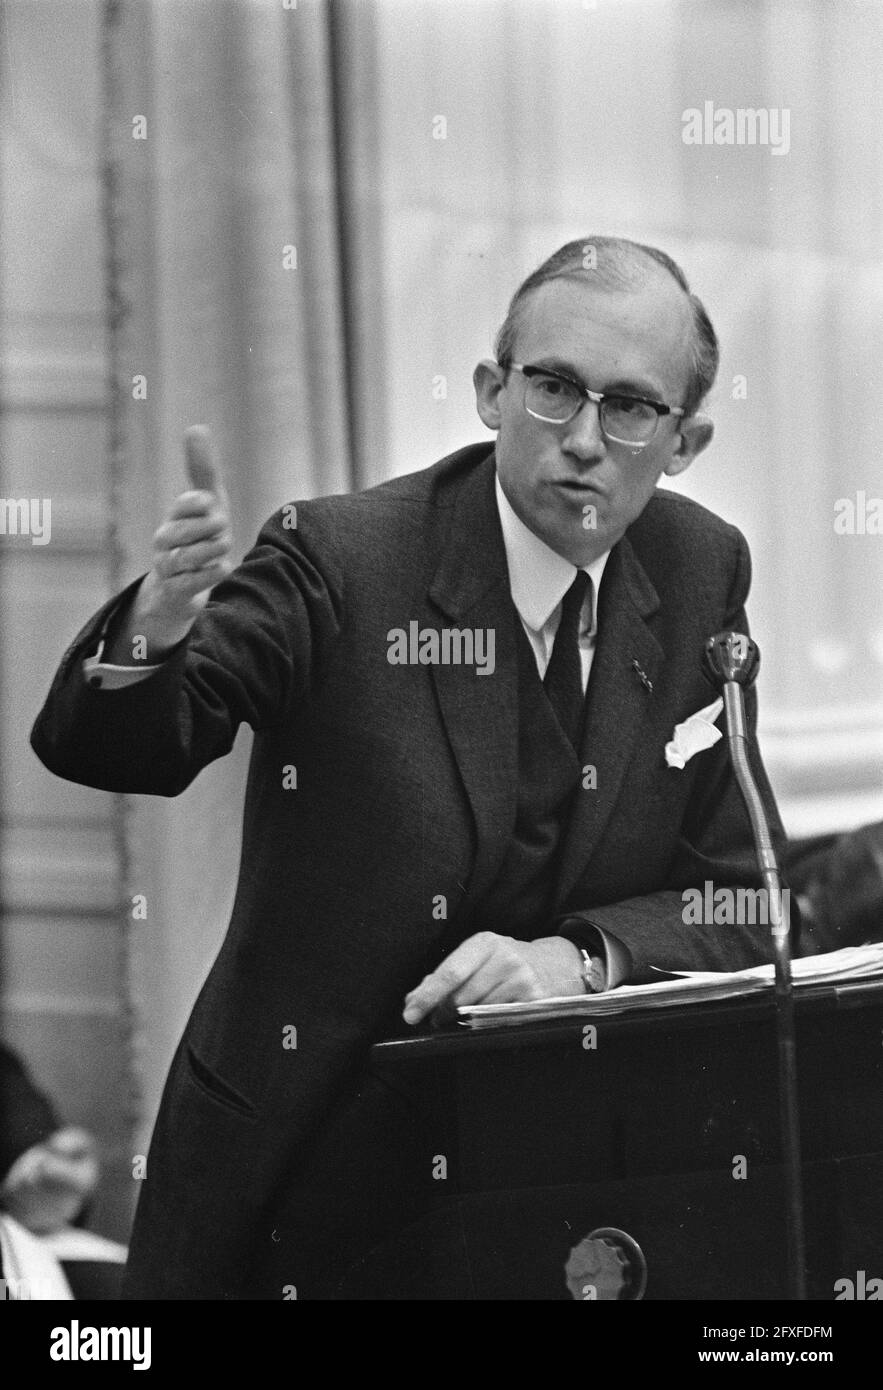 House of Representatives, government answers after first round of party debates. Minister Witteveen, October 16, 1969, Debates, The Netherlands, 20th century press agency photo, news to remember, documentary, historic photography 1945-1990, visual stories, human history of the Twentieth Century, capturing moments in time Stock Photo